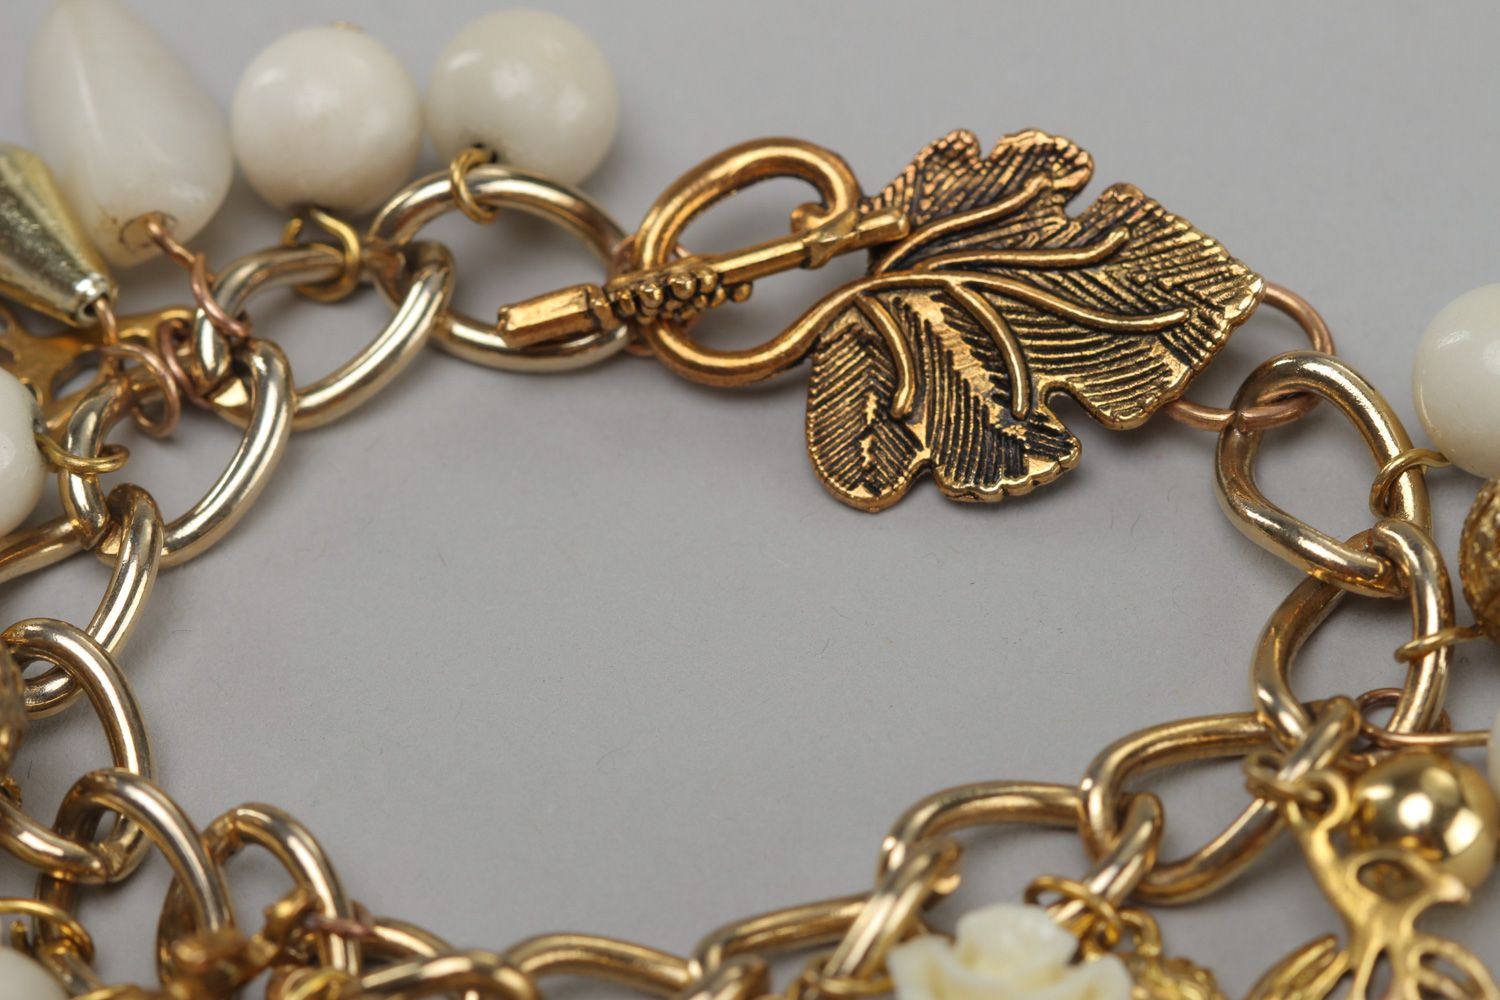 Handmade women's wrist bracelet with charms and beads of white and gold color photo 4